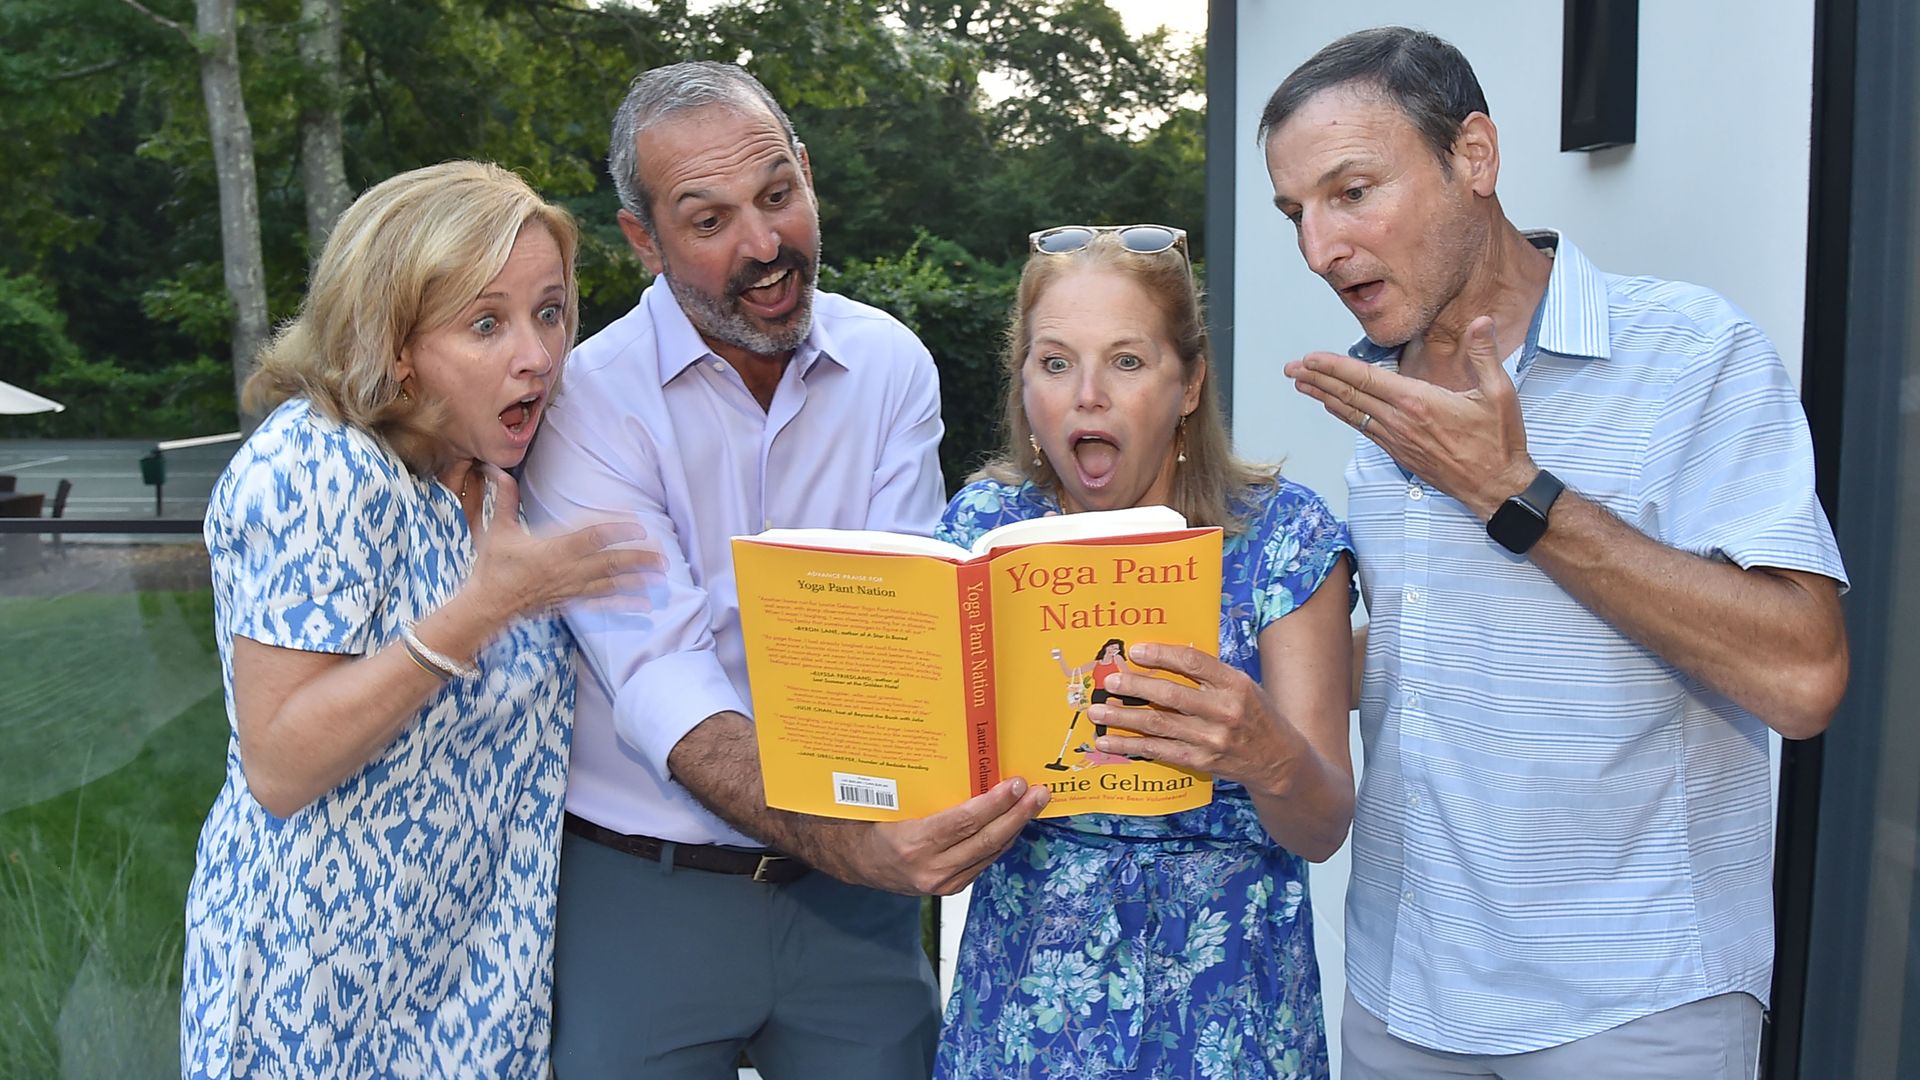 Katie Couric holds a book with a shocked expression on her face.